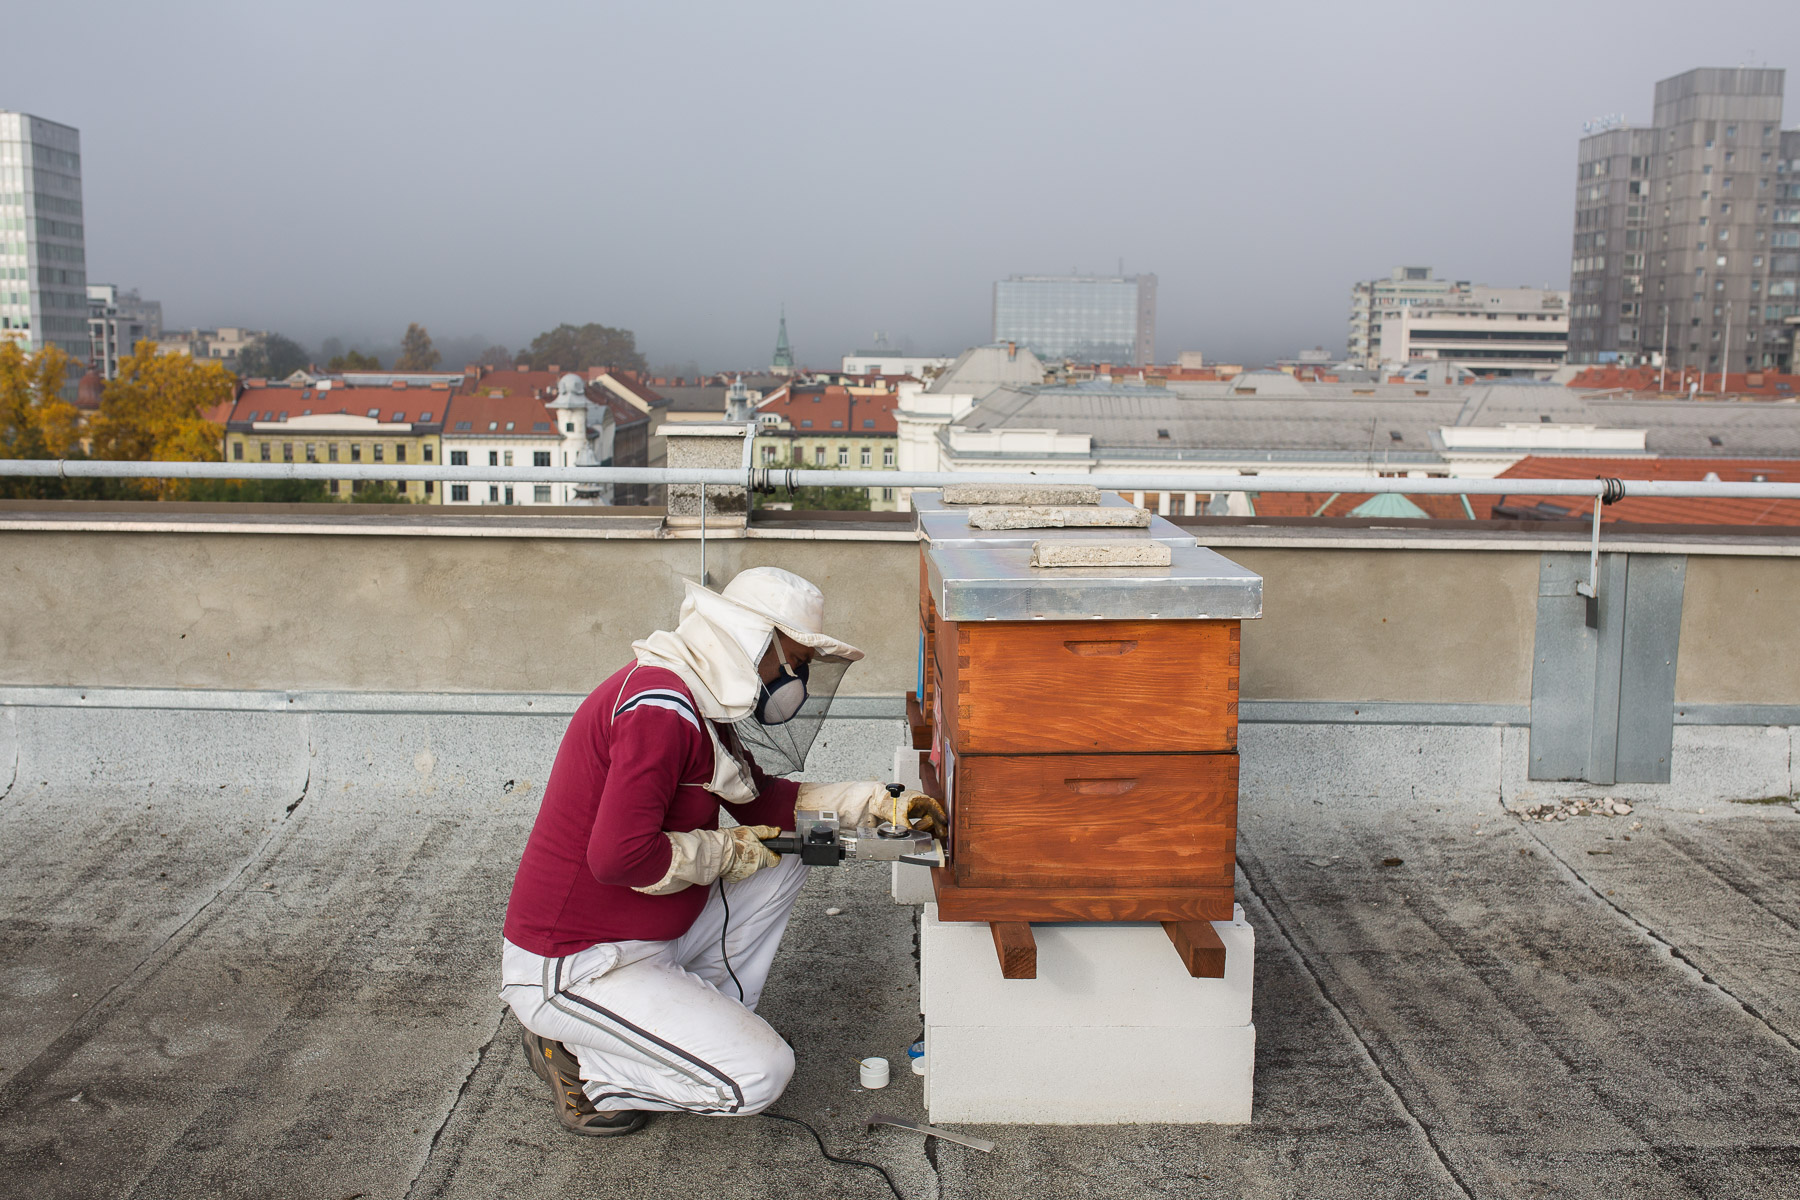 Nearing the end of the bee season, Trušnovec fights the spreading of varroa by administering oxalic acid via sublimator vaporizer on the rooftop of Radio Slovenia.